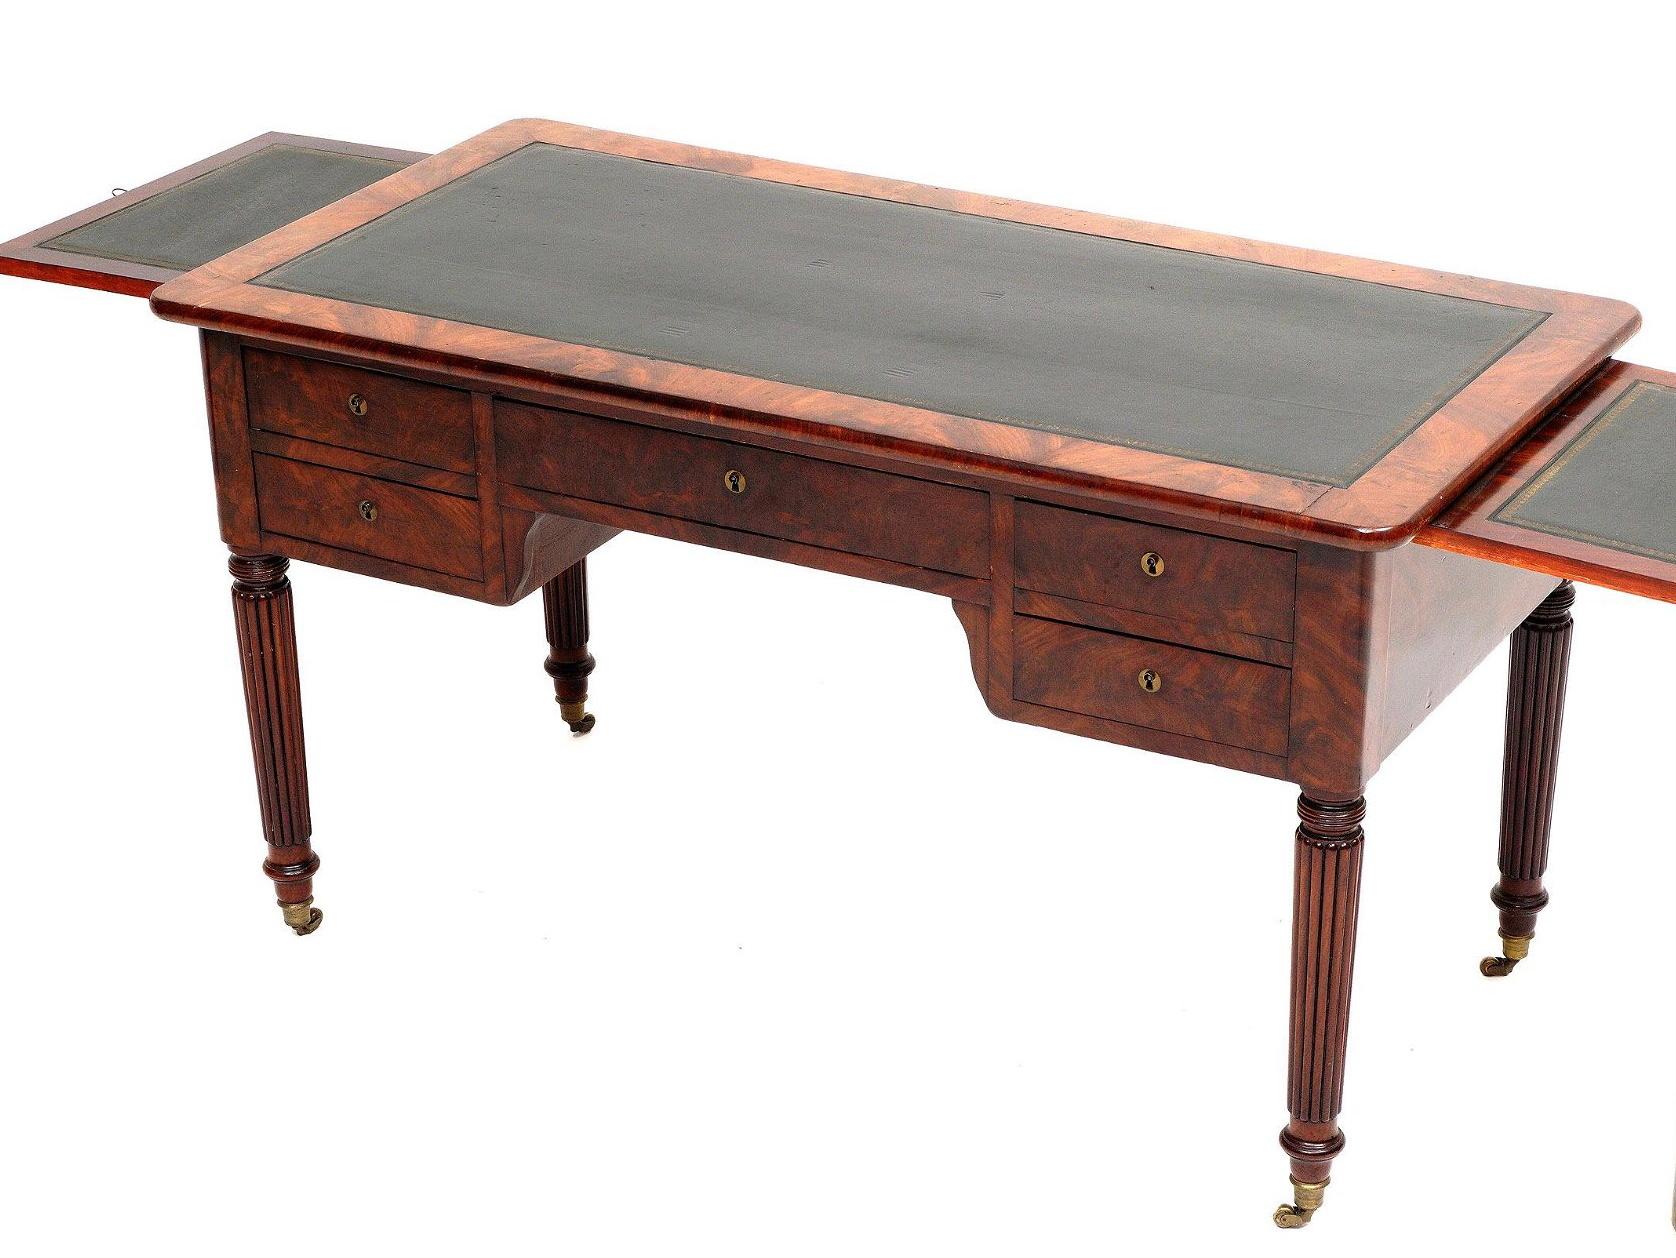 A William IV mahogany writing table / desk. Inset green tooled leather embossed writing surface, center drawer flanked by two short drawers. Inset tooled leather slides on either end, fluted and tapered legs ending in brass caps and castors.
Ex